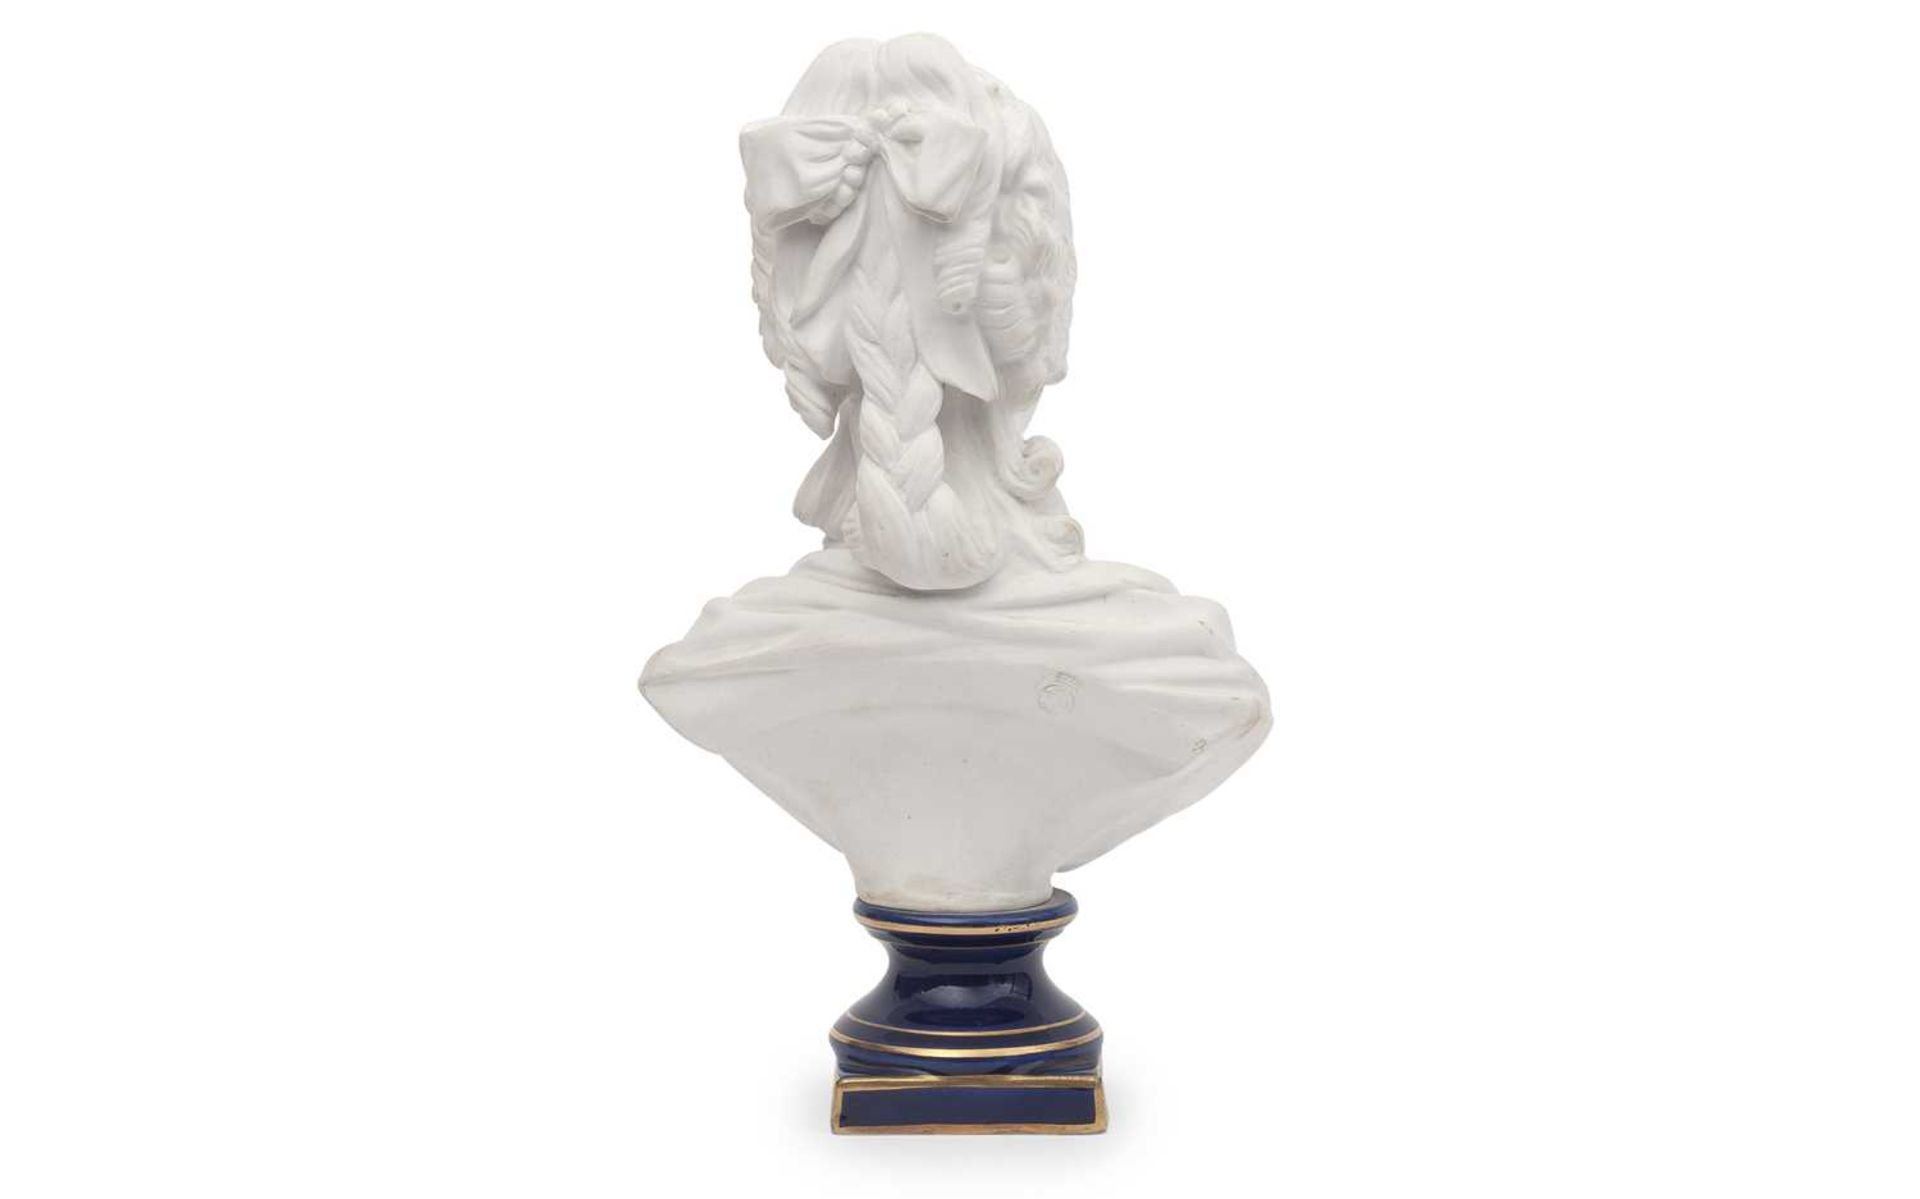 AFTER ALEXANDRE BRACHARD (FRENCH, 1775-1830): A LIMOGES BUST OF MARIE ANTOINETTE - Image 3 of 3